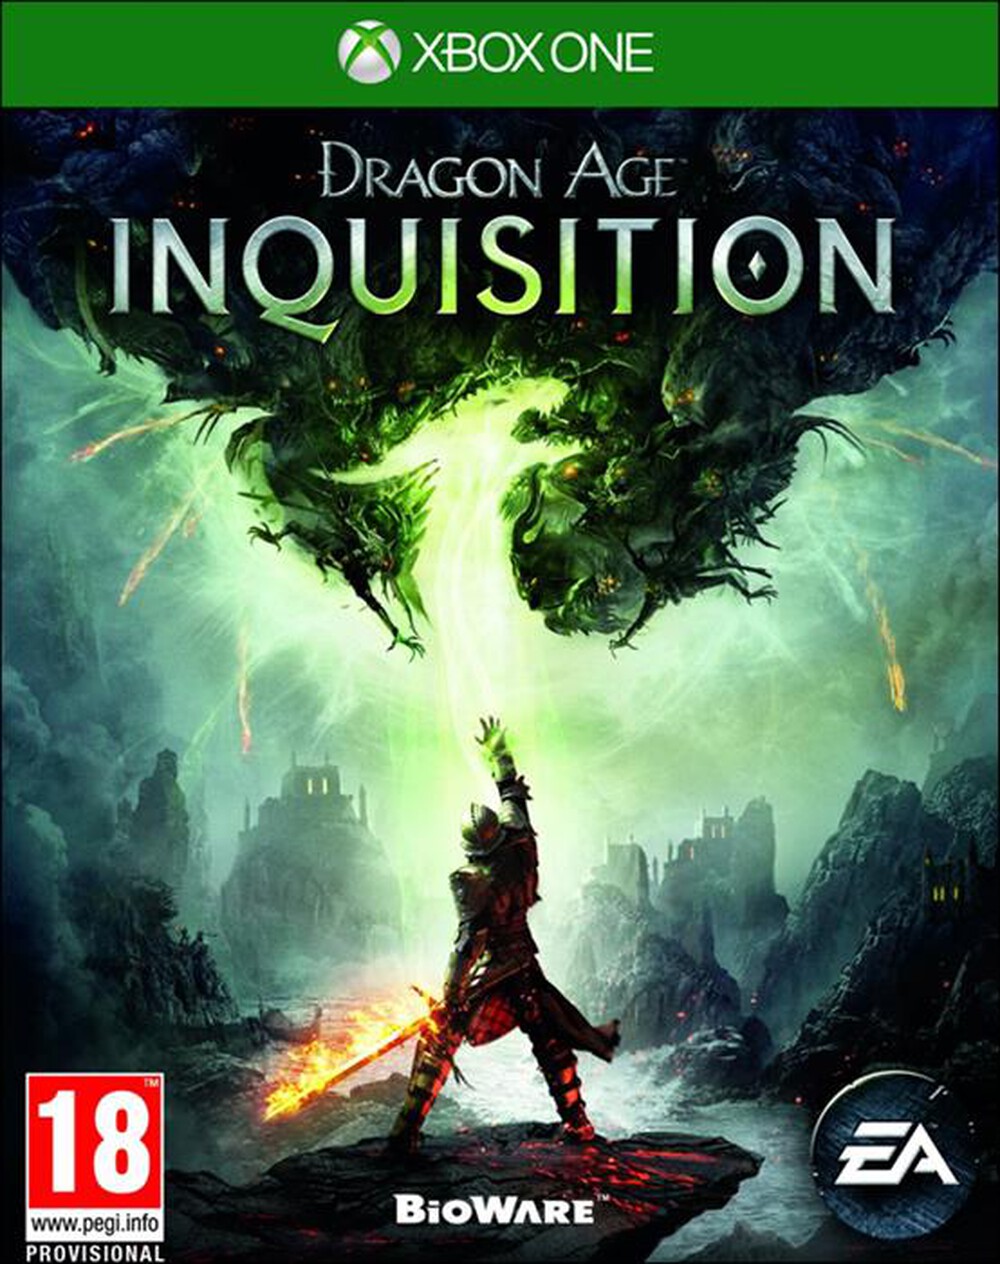 "ELECTRONIC ARTS - Dragon Age Inquisition Xbox One"